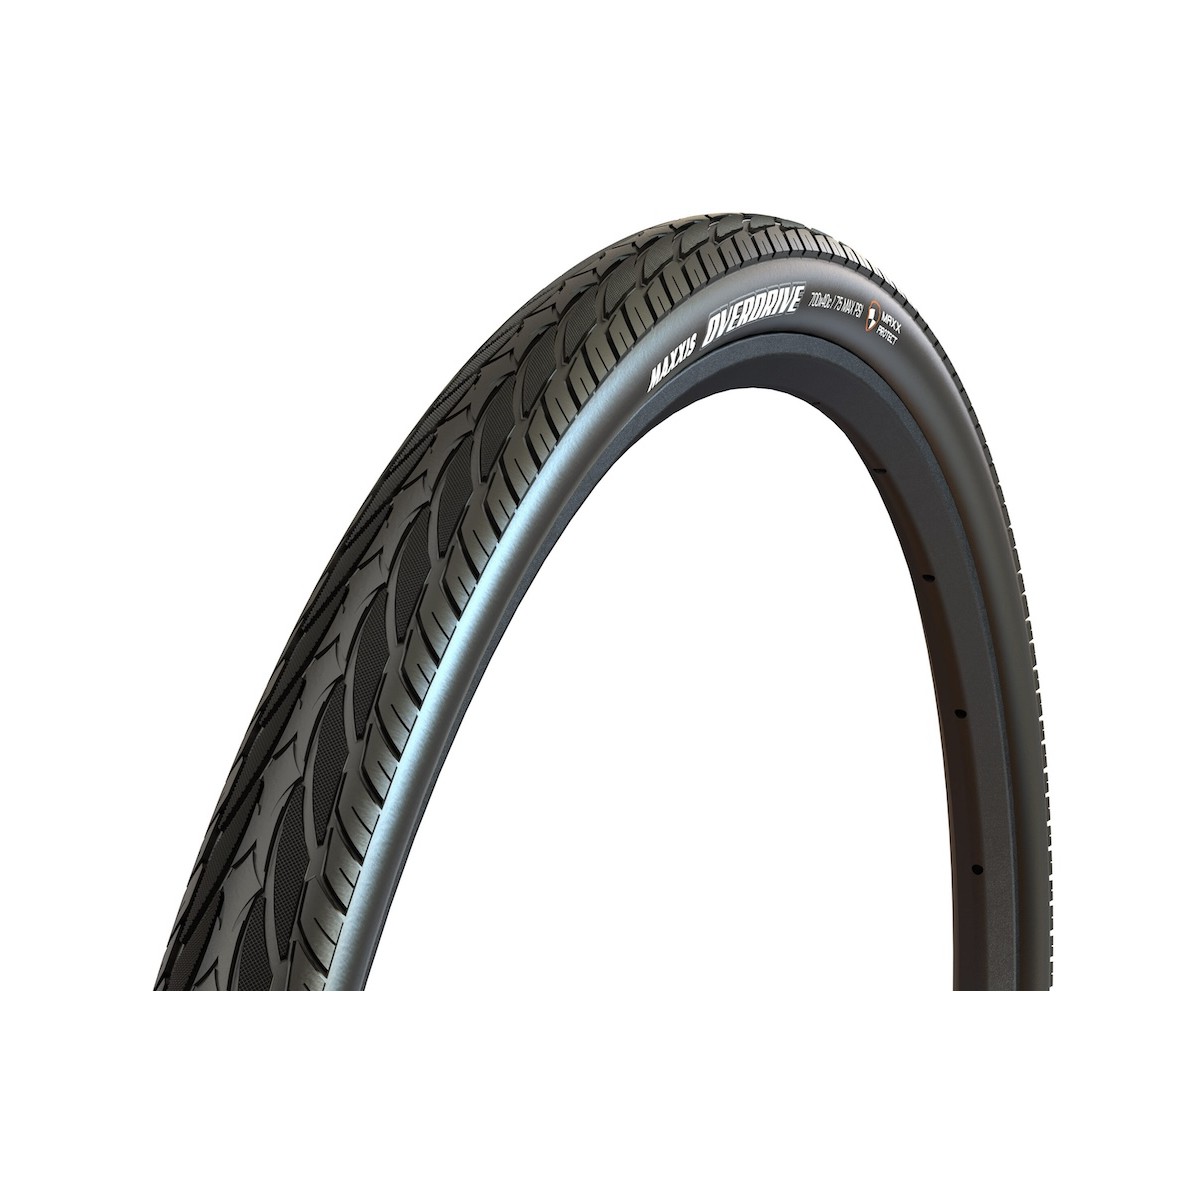 MAXXIS OVERDRIVE 700 x 38